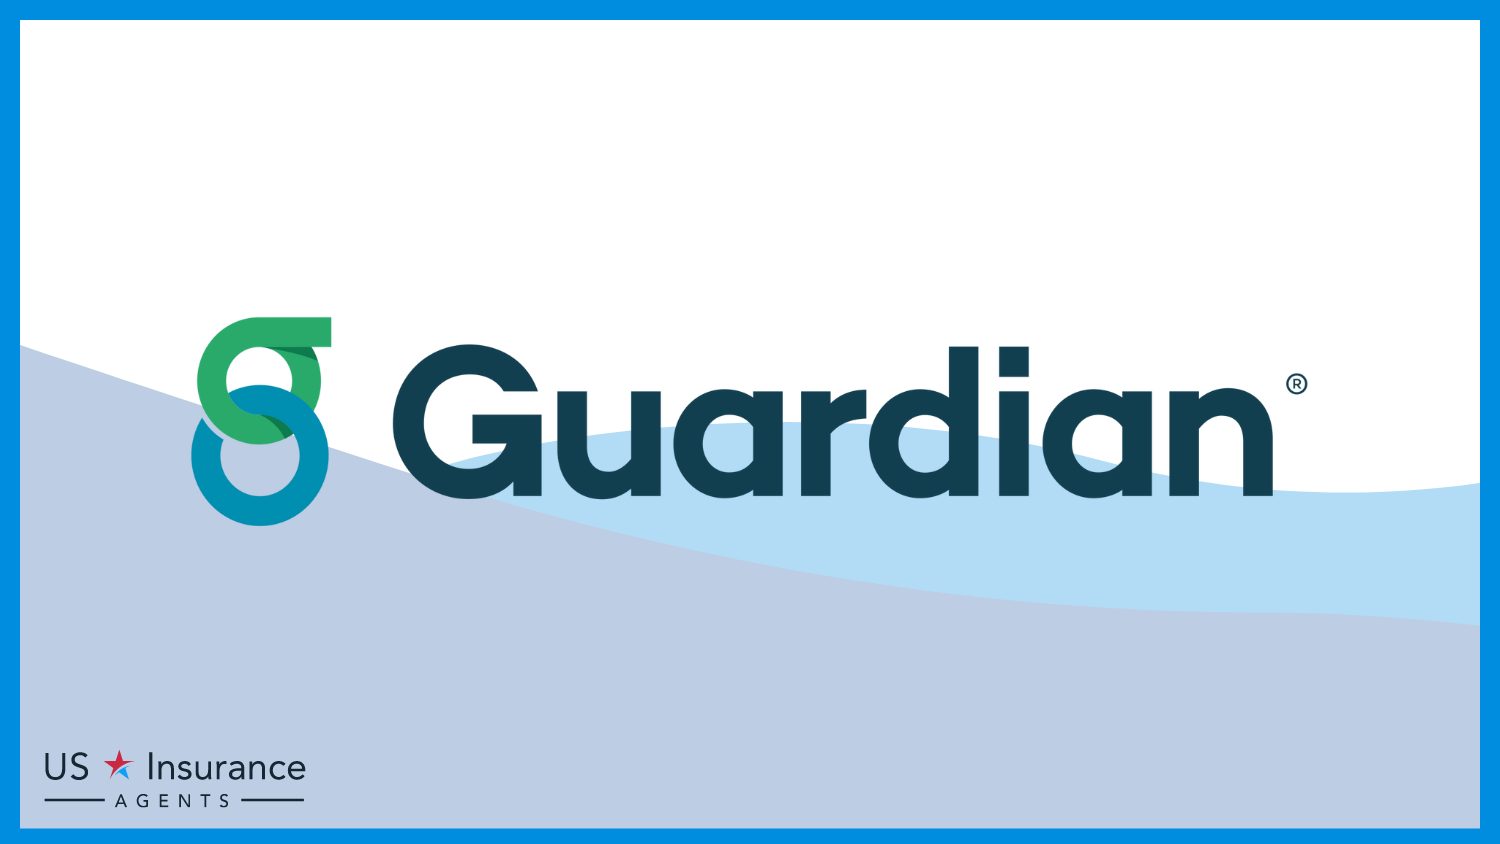 Guardian Life: Best Life Insurance for Kidney Transplant Patients